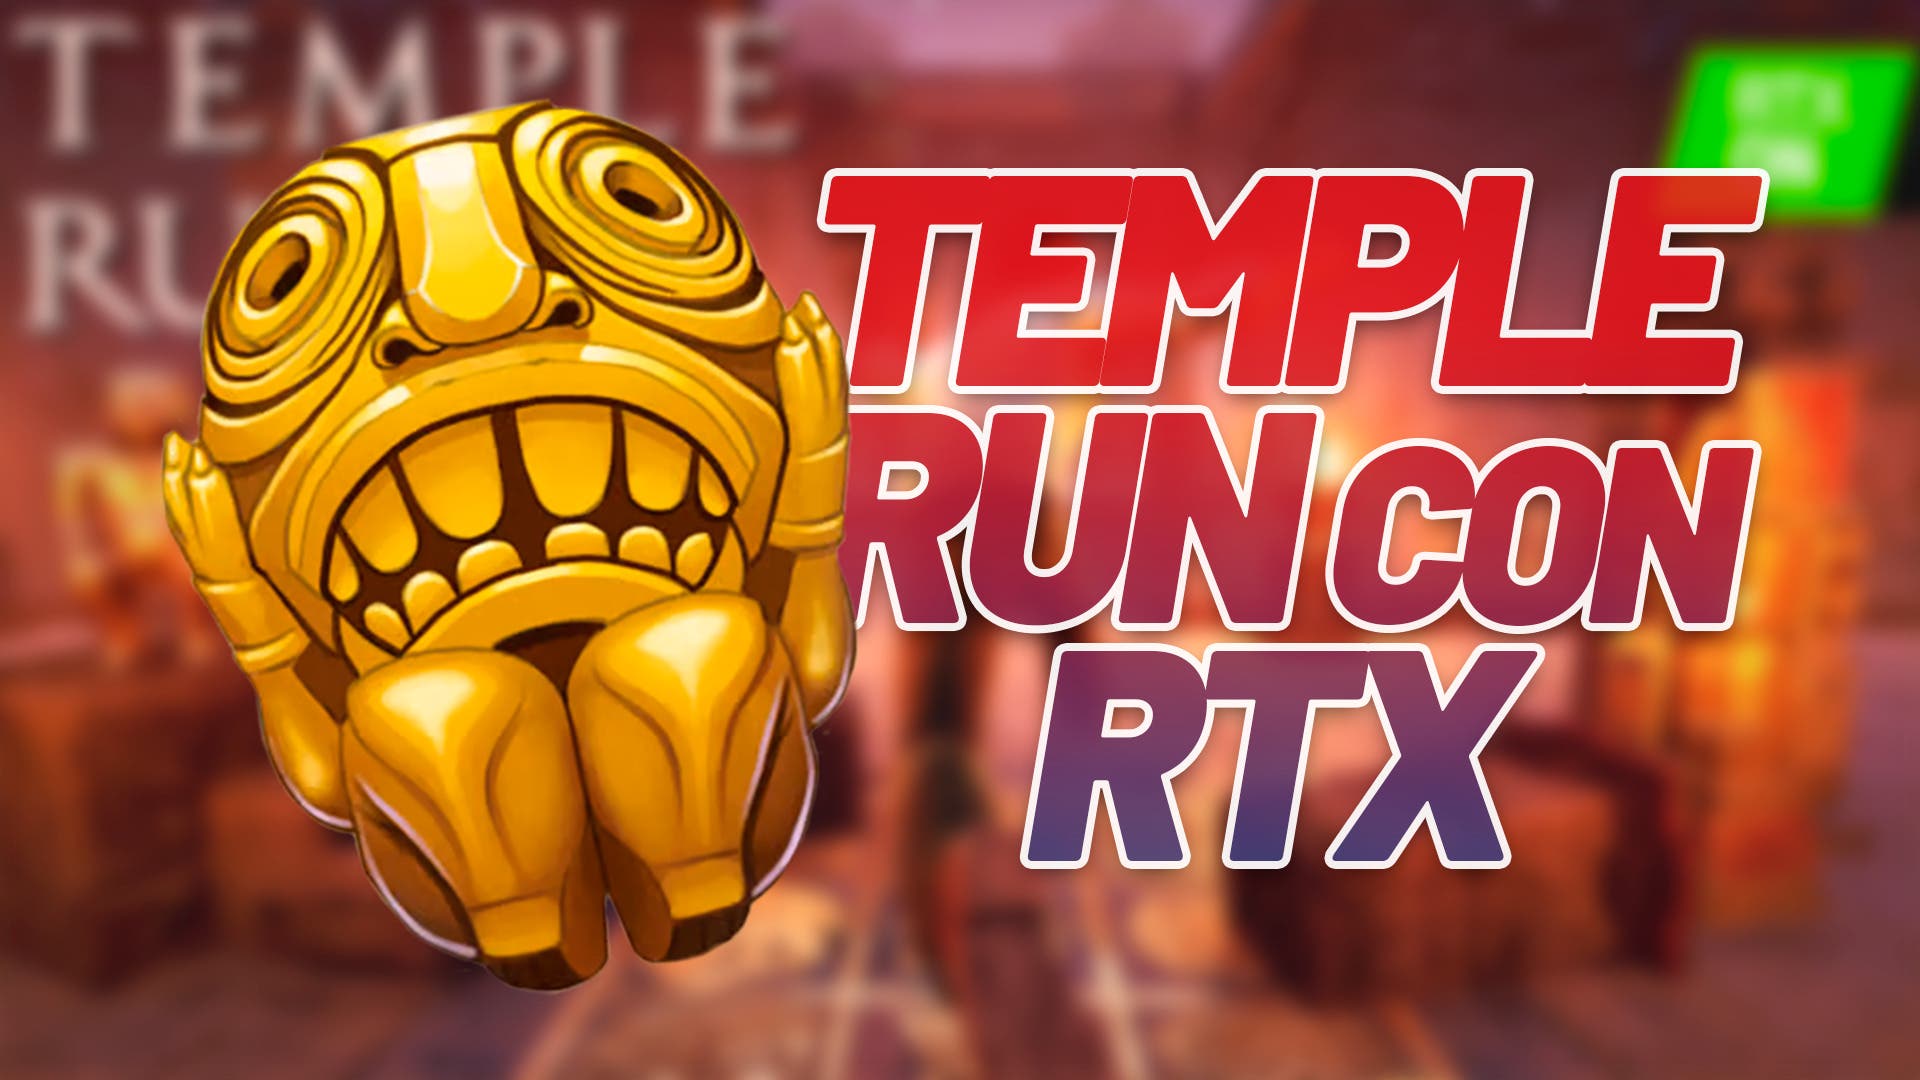 Be blown away by this fan-made remake of the classic Temple Run;  With graphics and RTX!